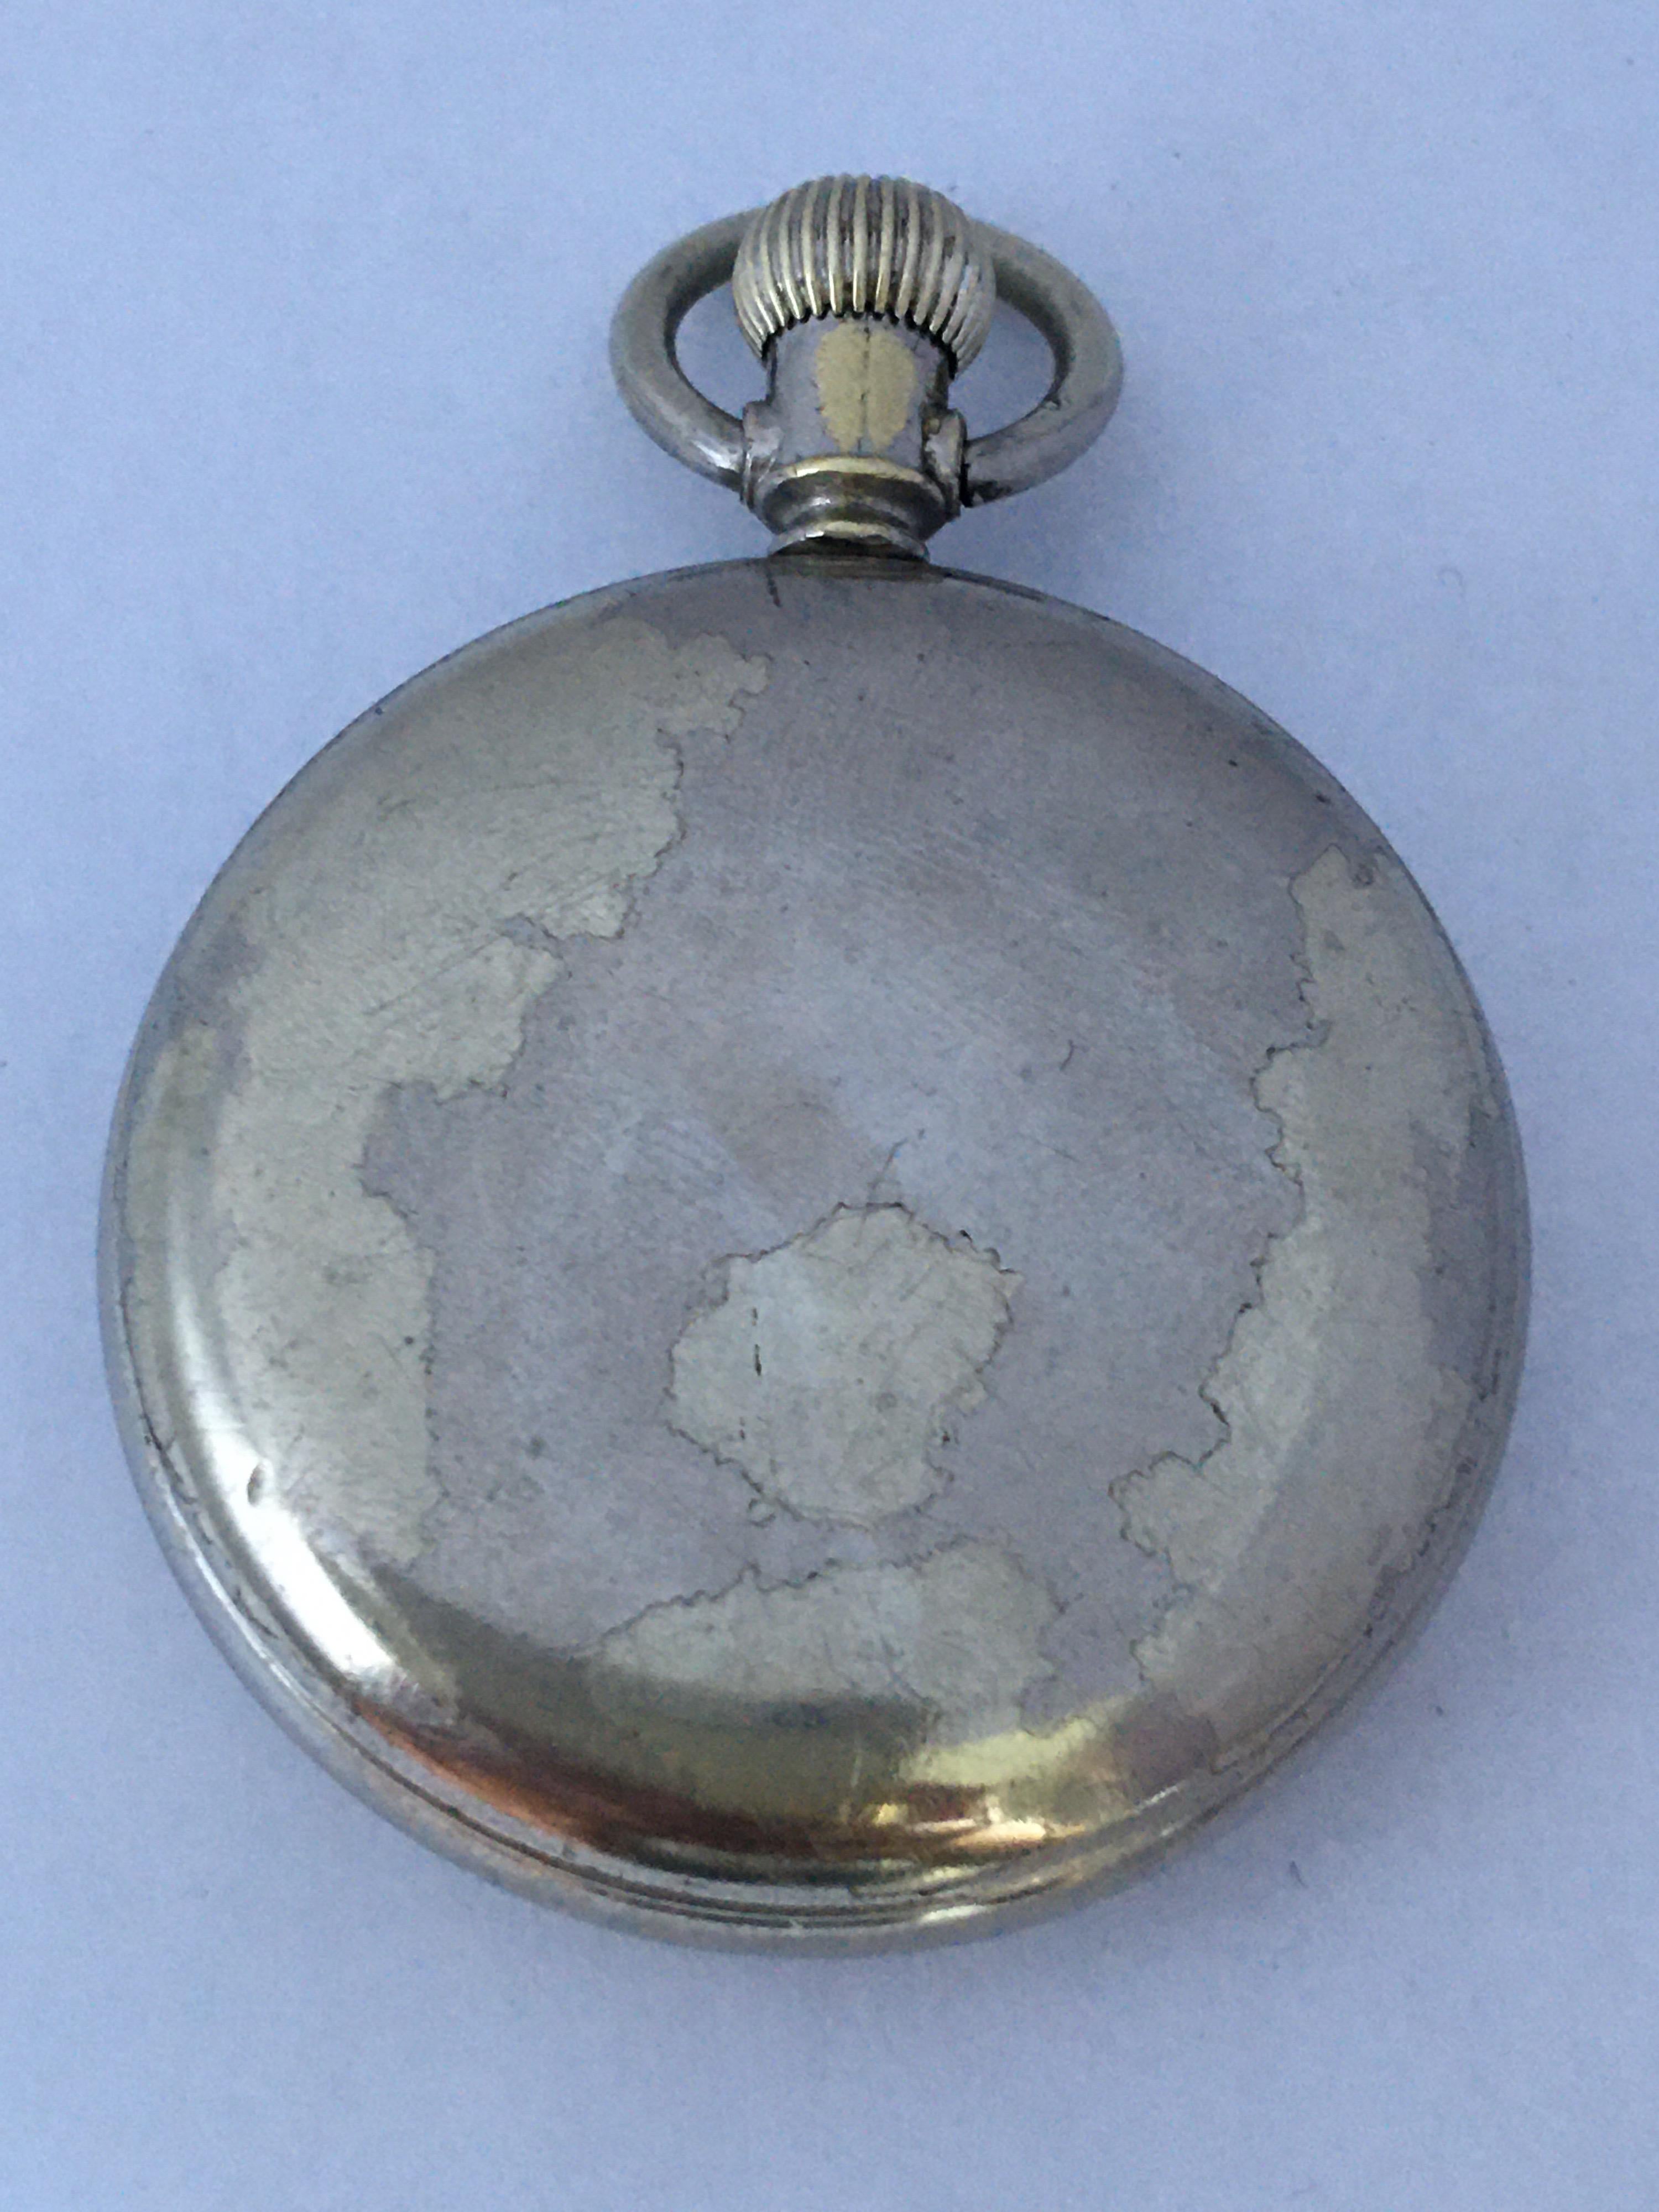 This beautiful 42mm diameter hand winding pocket watch is in good working condition and it is ticking nicely. It is recently been serviced.  Visible signs of ageing and wear with light scratches on the glass and on the watch case as shown. The